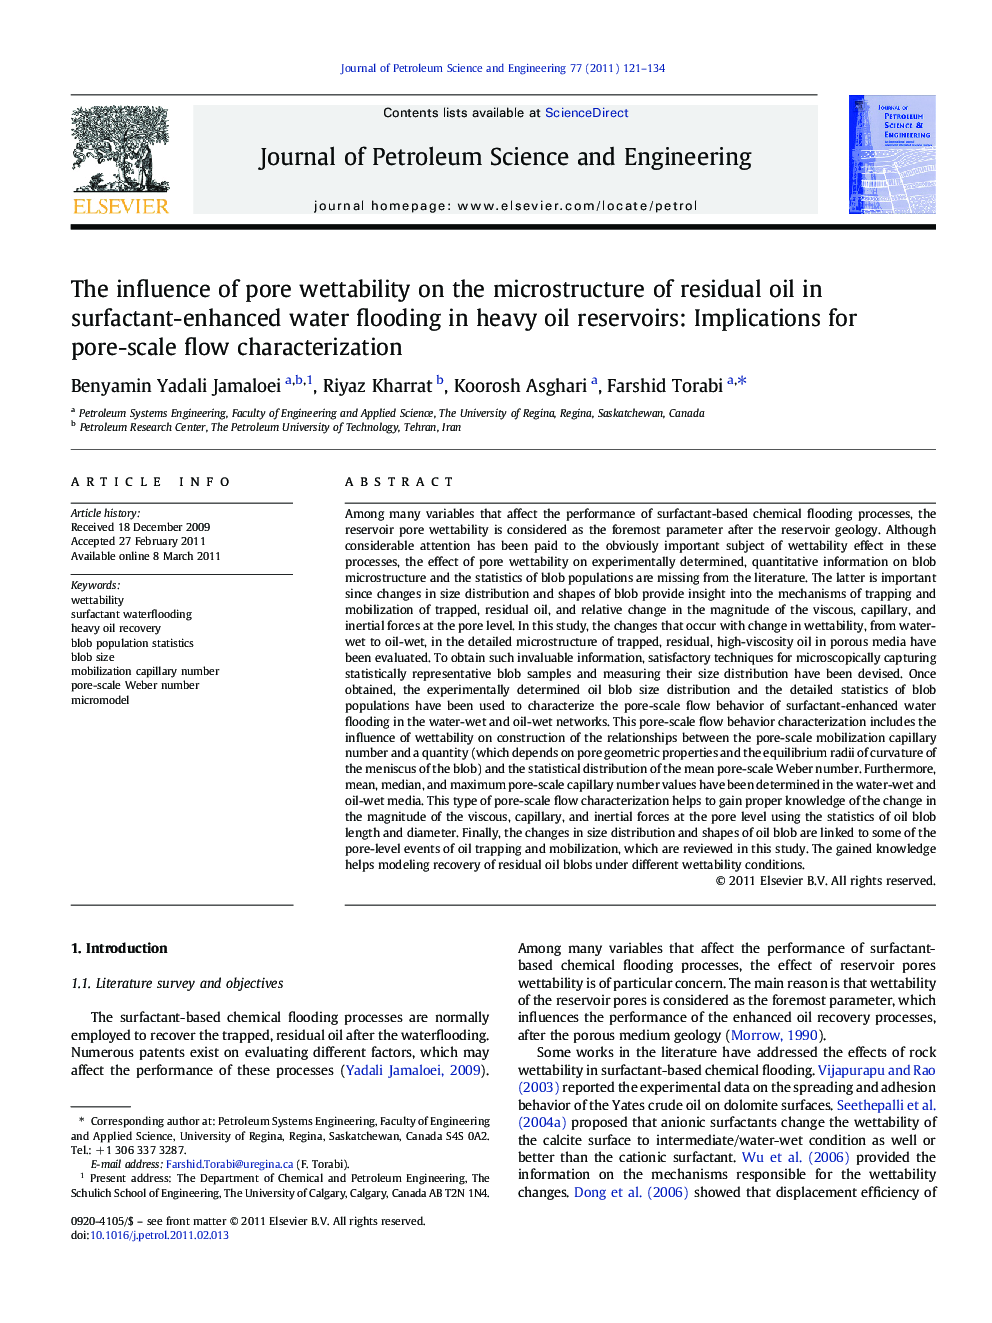 The influence of pore wettability on the microstructure of residual oil in surfactant-enhanced water flooding in heavy oil reservoirs: Implications for pore-scale flow characterization